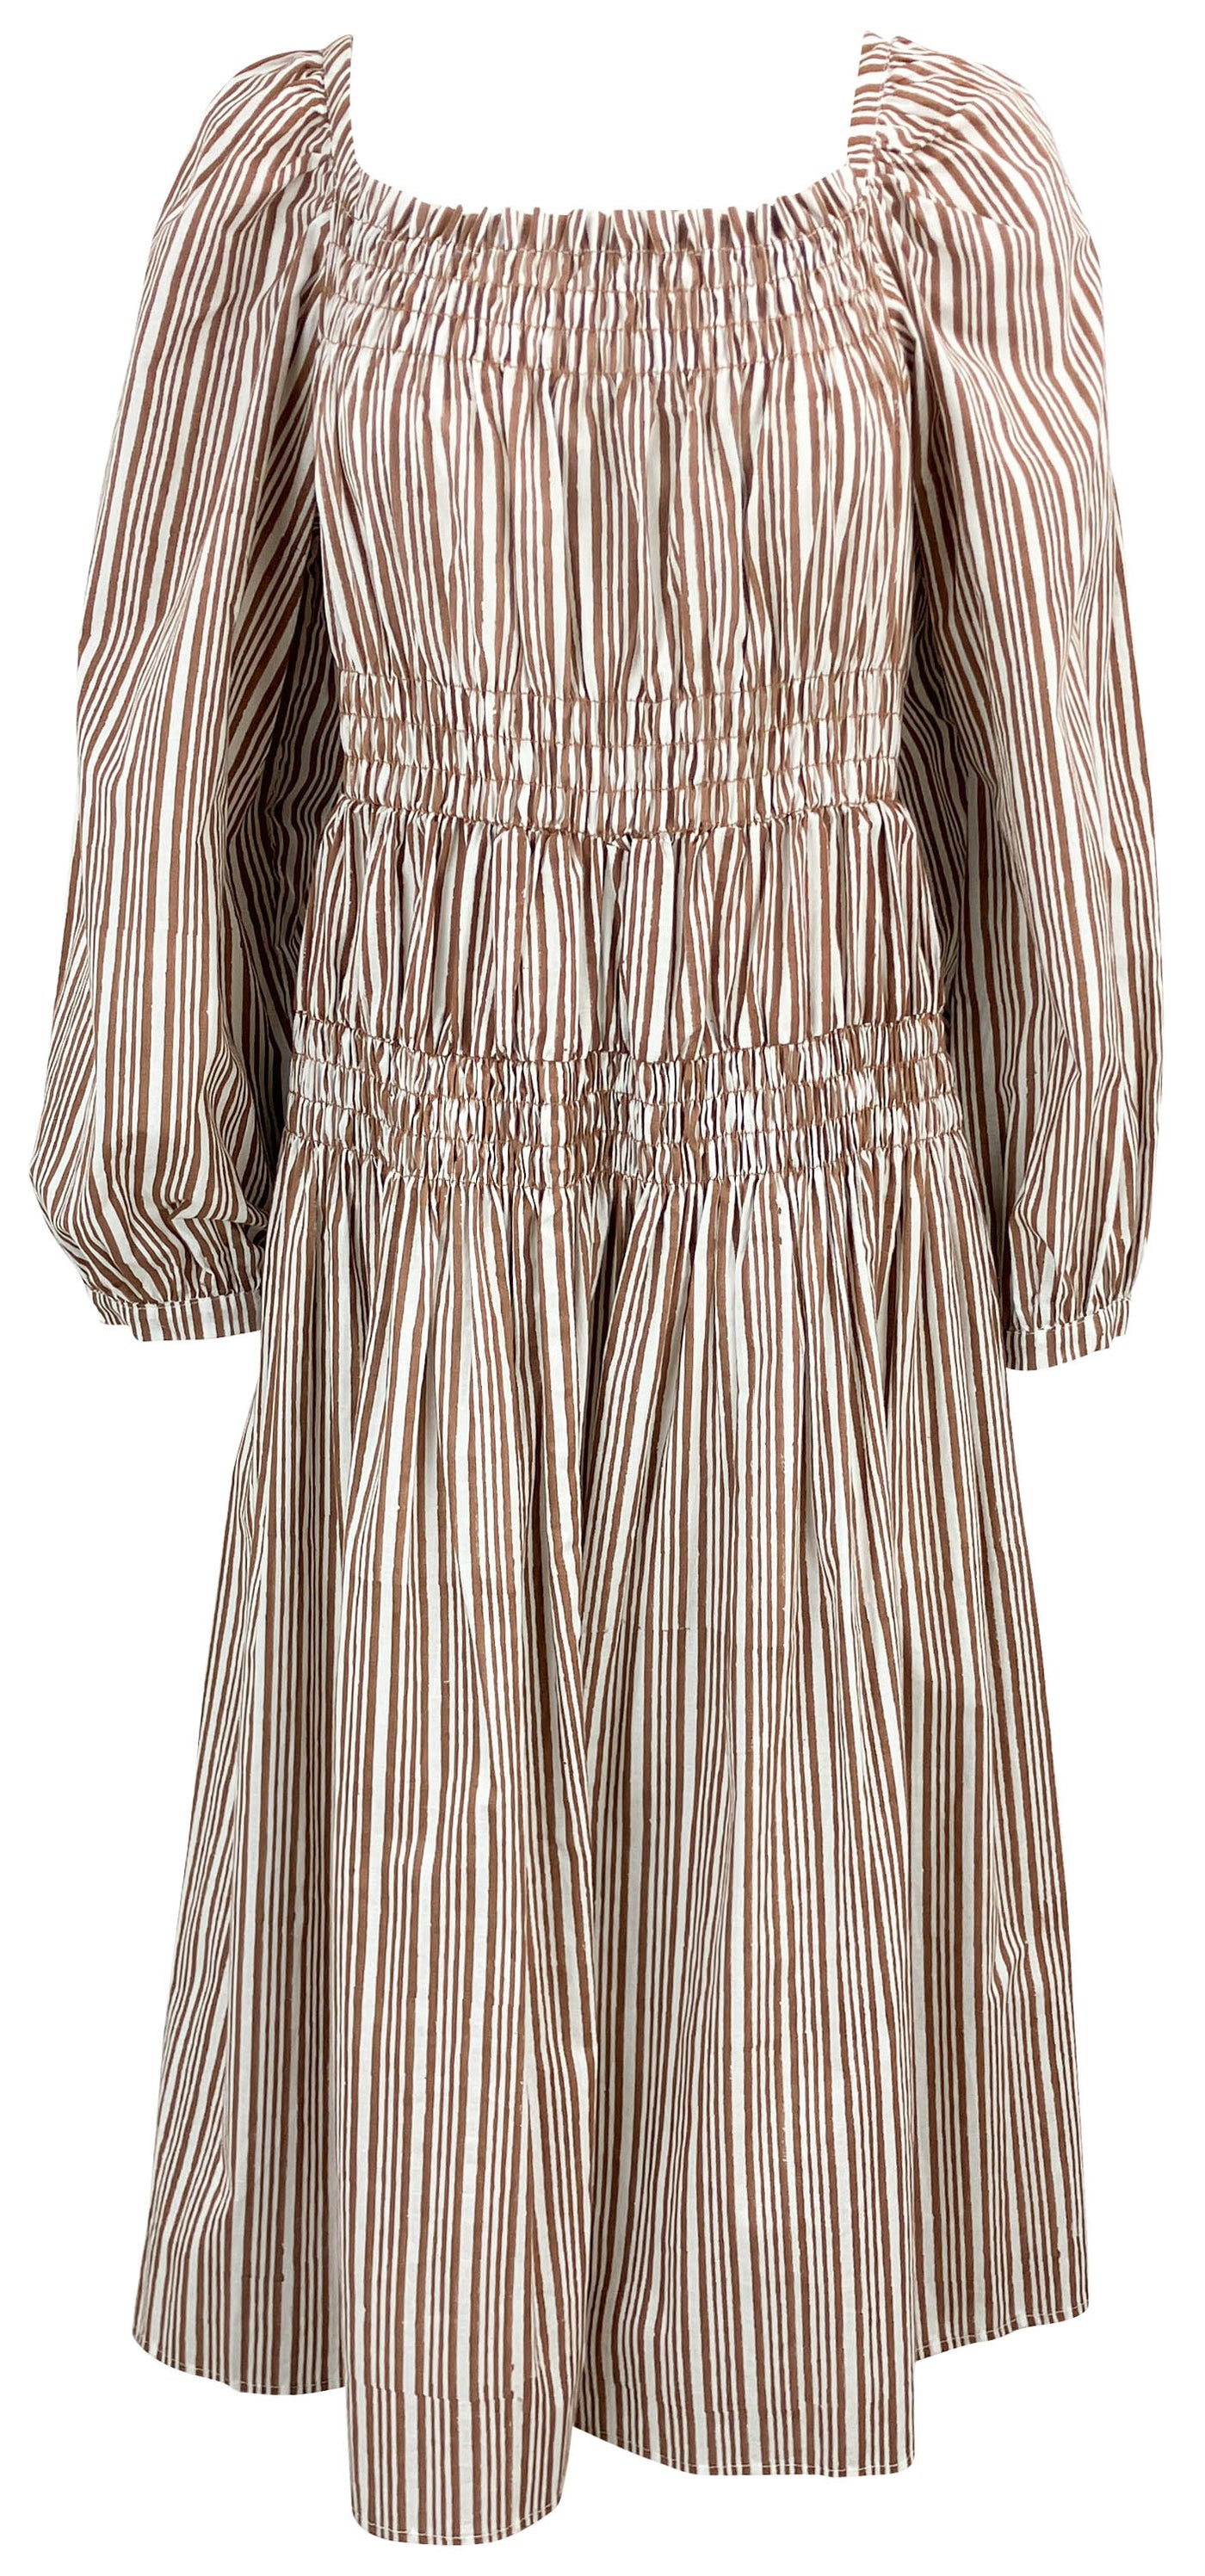 Ciao Lucia! Long Sleeve Midi Dress in White and Brown Stripe - Discounts on Ciao Lucia! at UAL